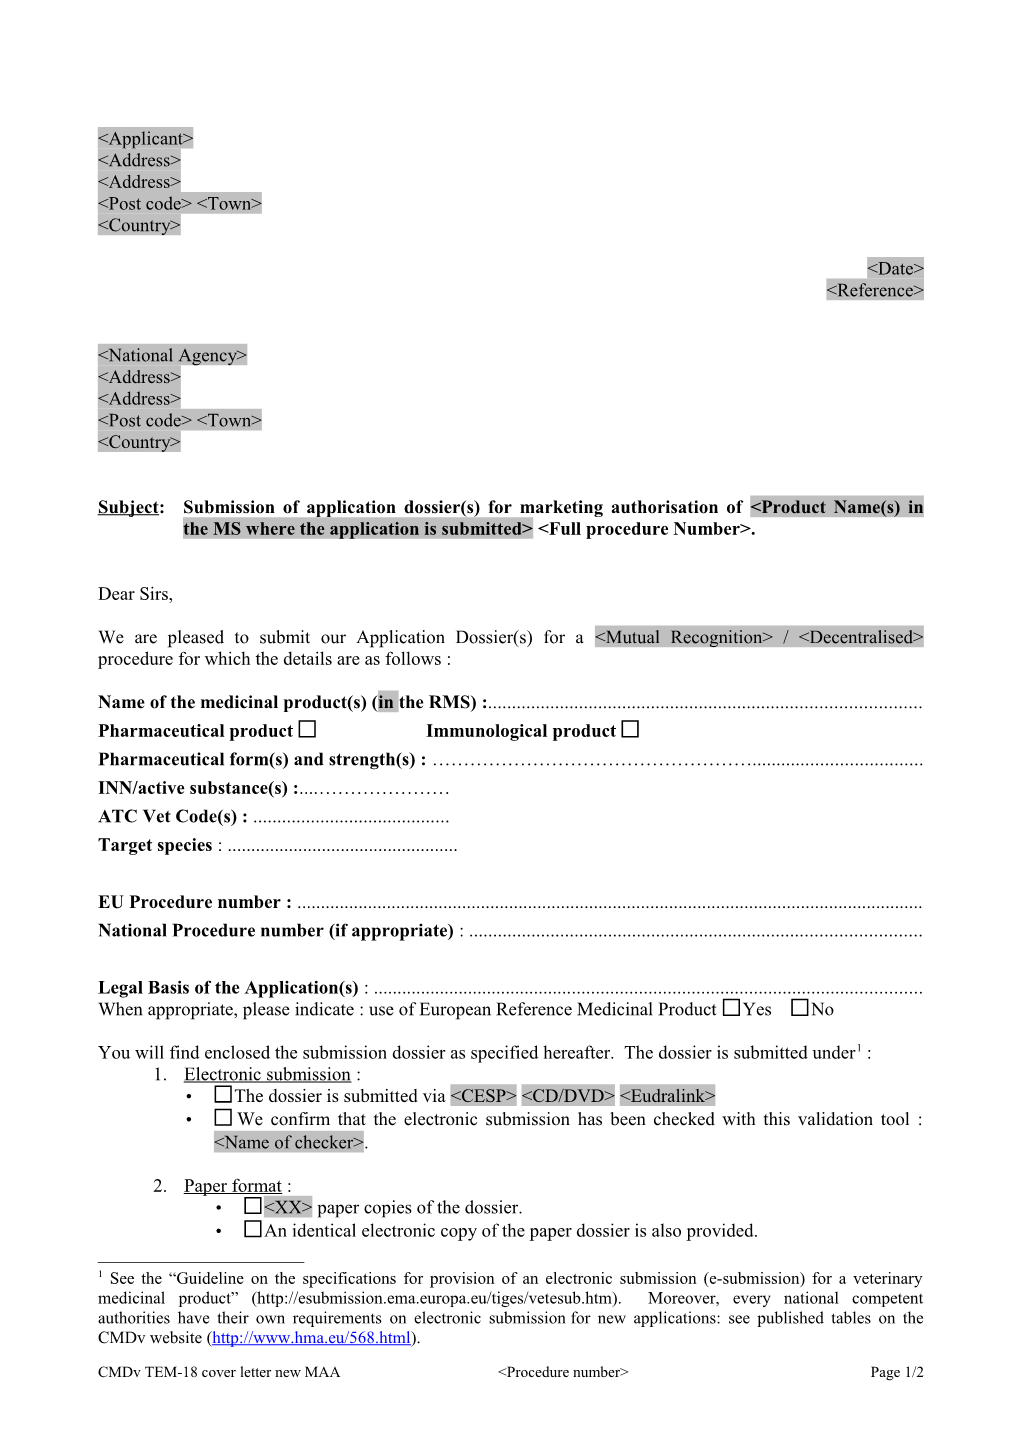 TEM-018-00 Cover Letter Template New MAA 07.02.13 EMA-Cmdv-579873-2008